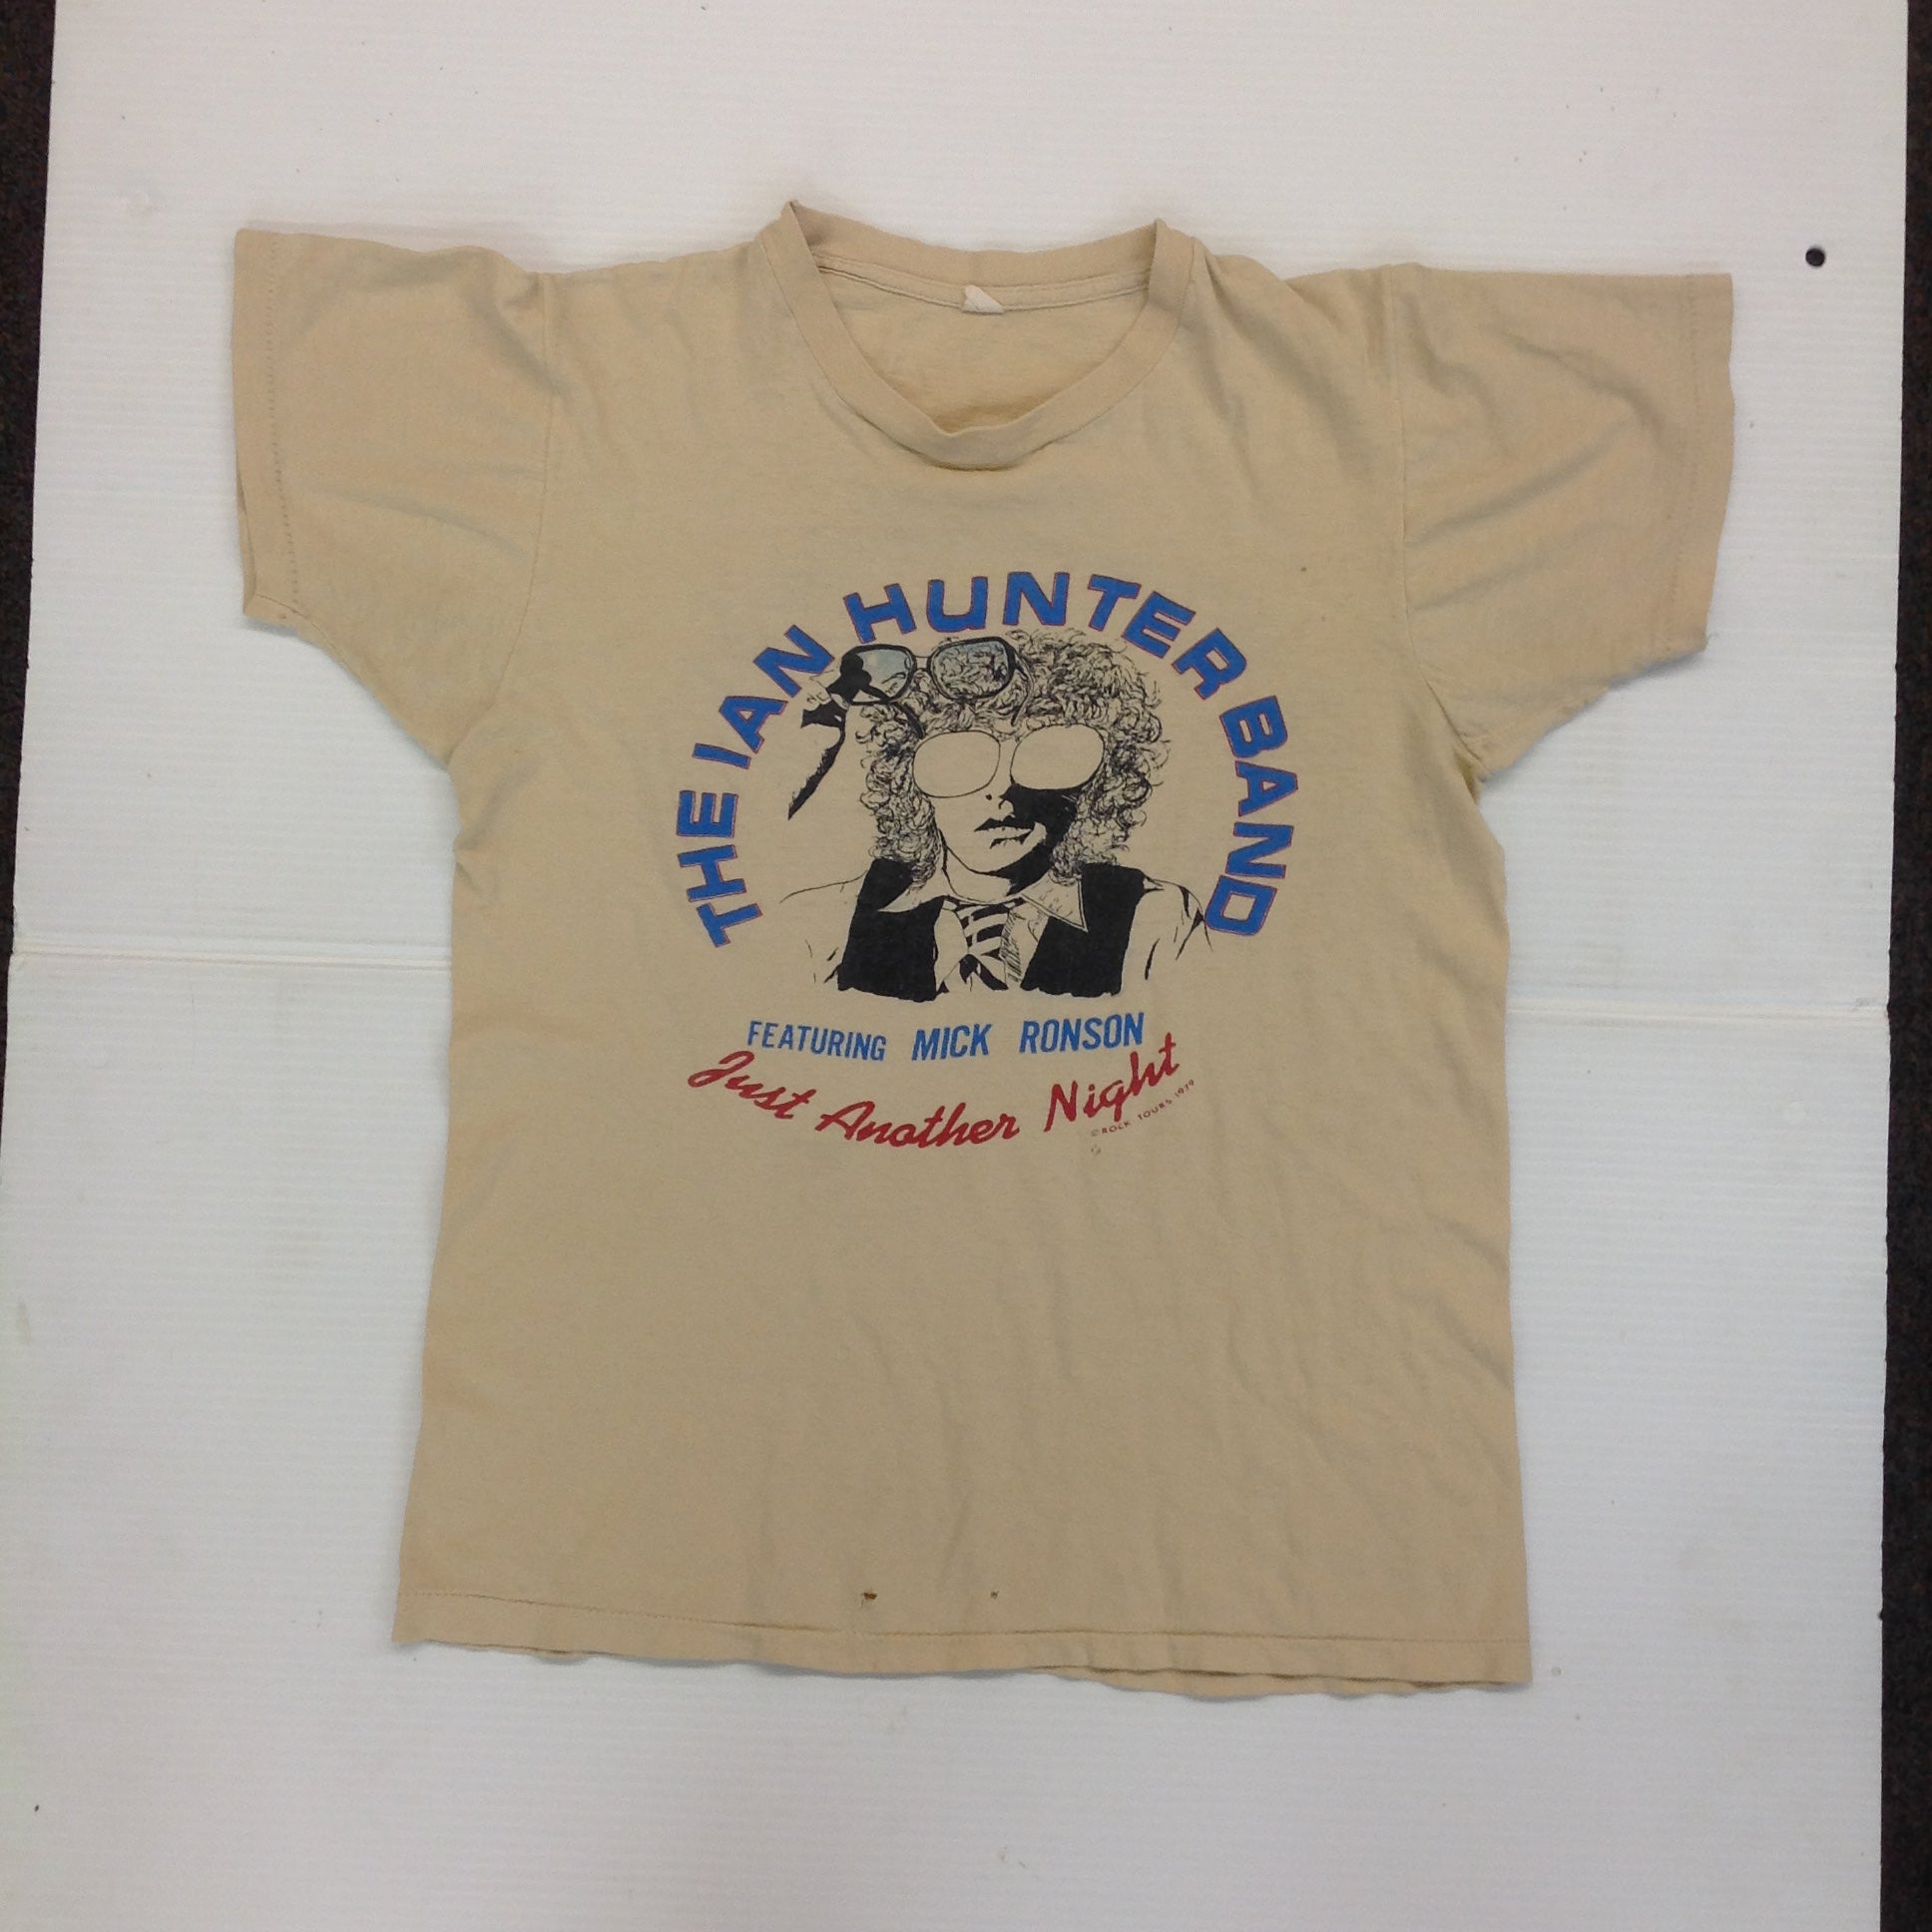 Vintage 1979 The Ian Hunter Band Featuring Mick Ronson Just Another Night U.S. Tour '79 T-Shirt